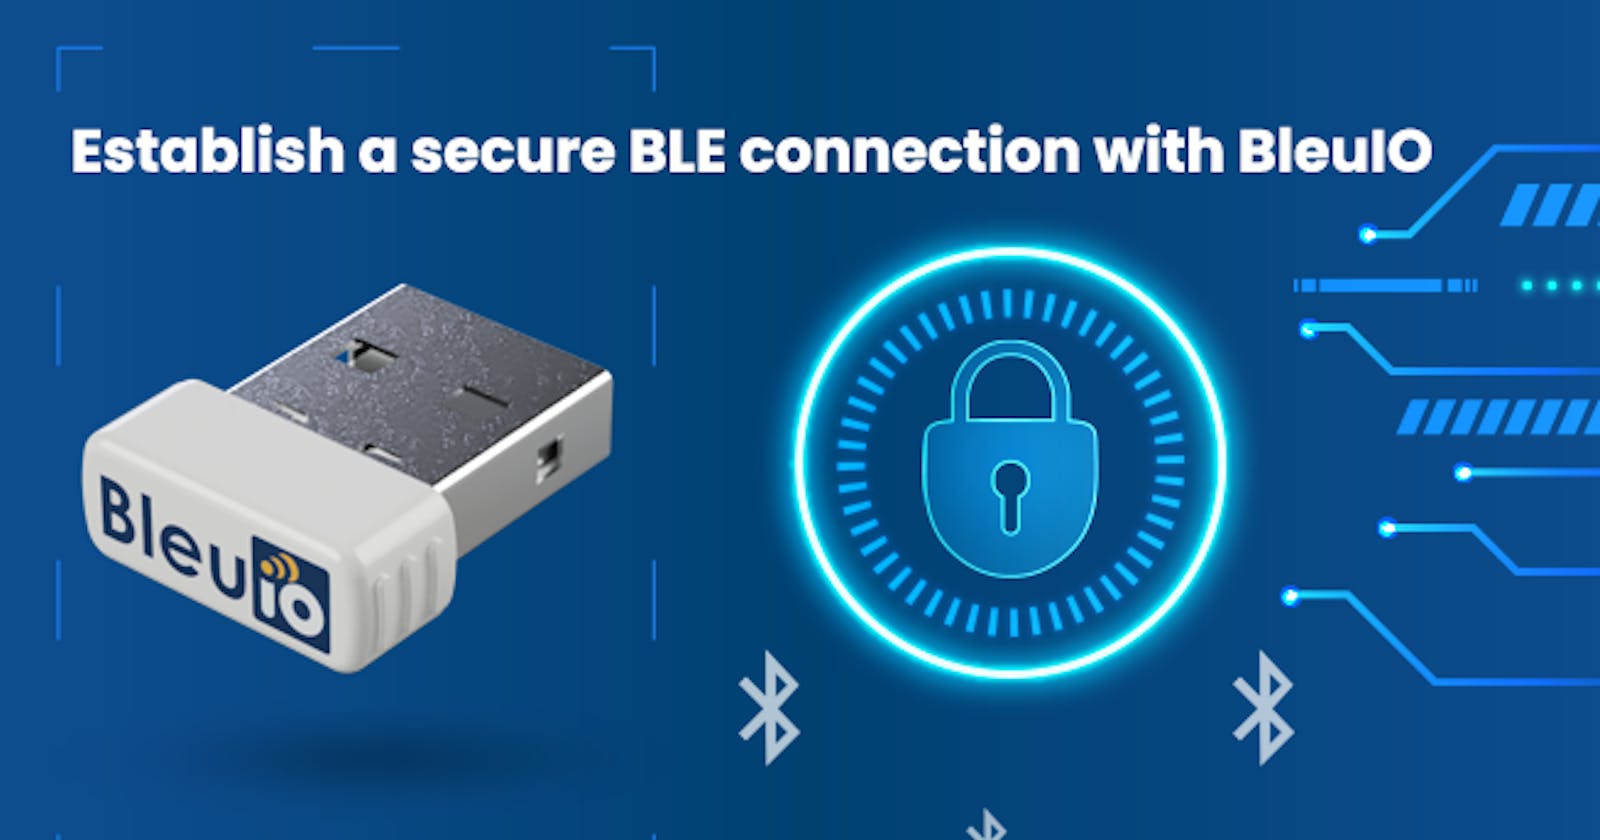 Security Modes/Levels of a BLE Connection